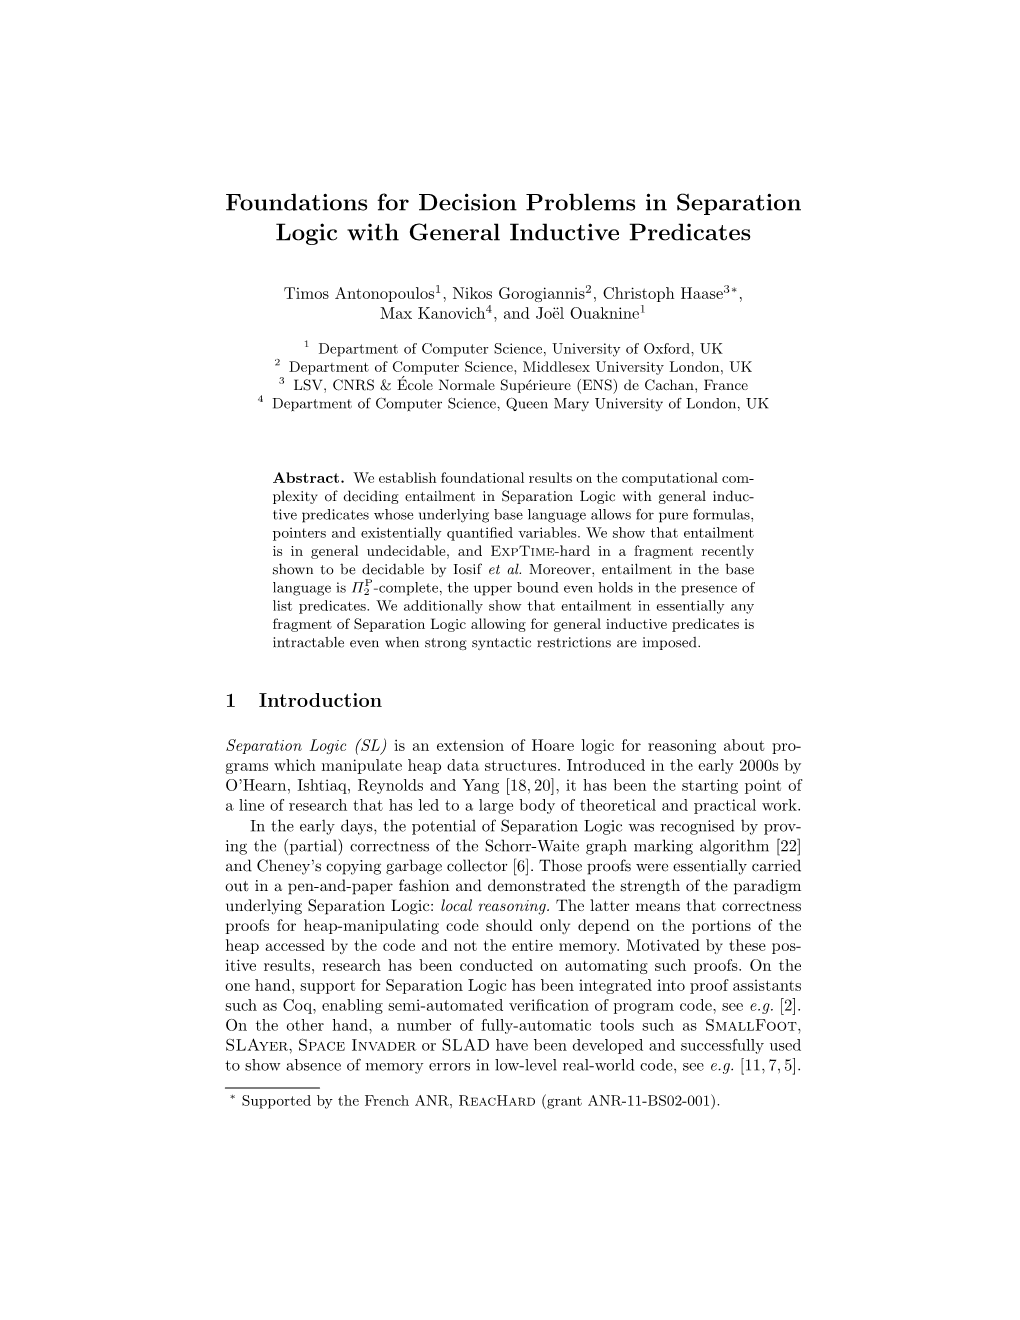 Foundations for Decision Problems in Separation Logic with General Inductive Predicates